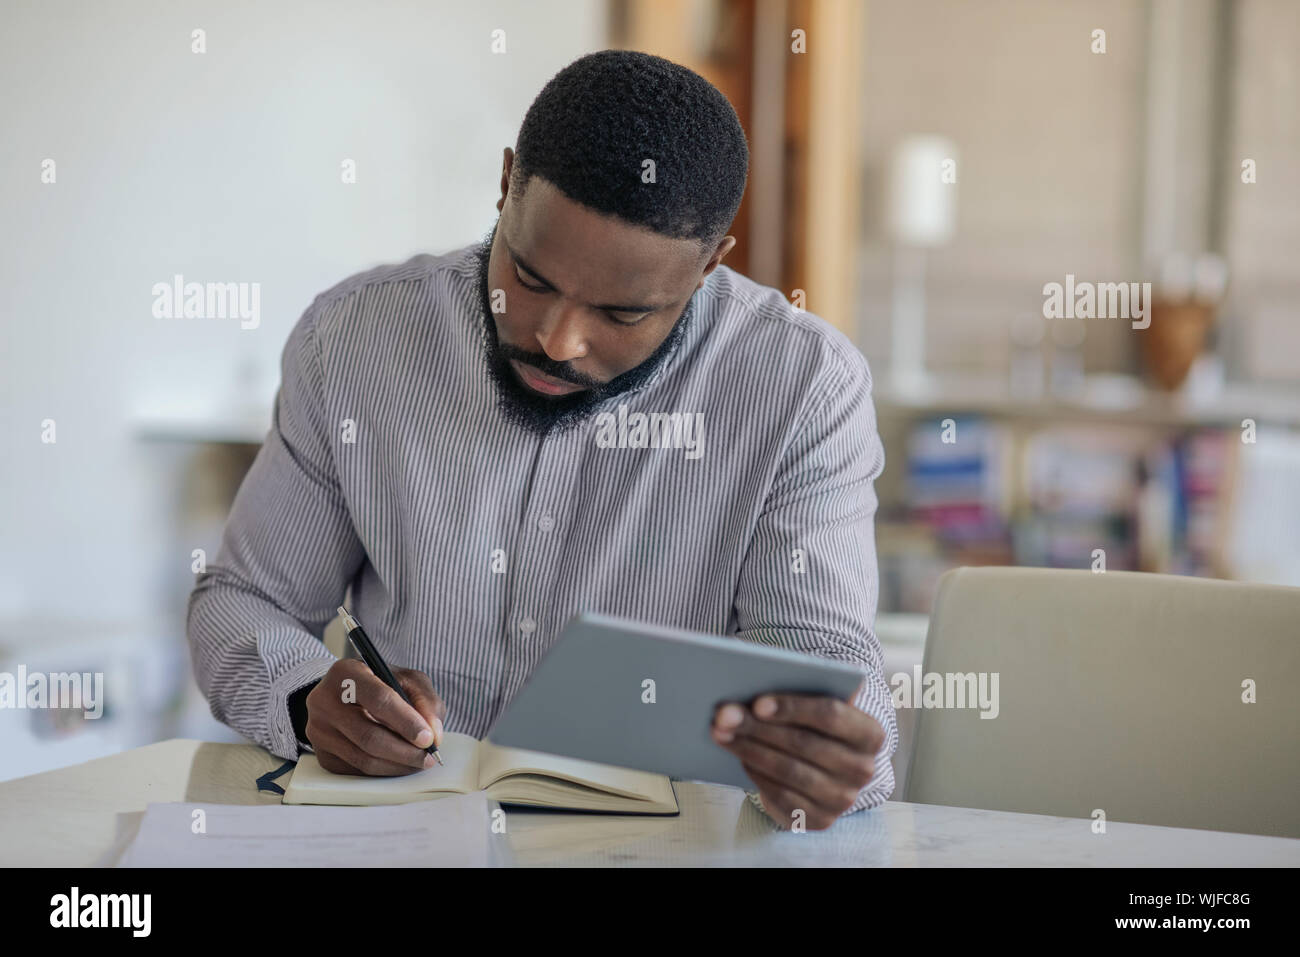 Young African American man using a digital tablet at home Stock Photo